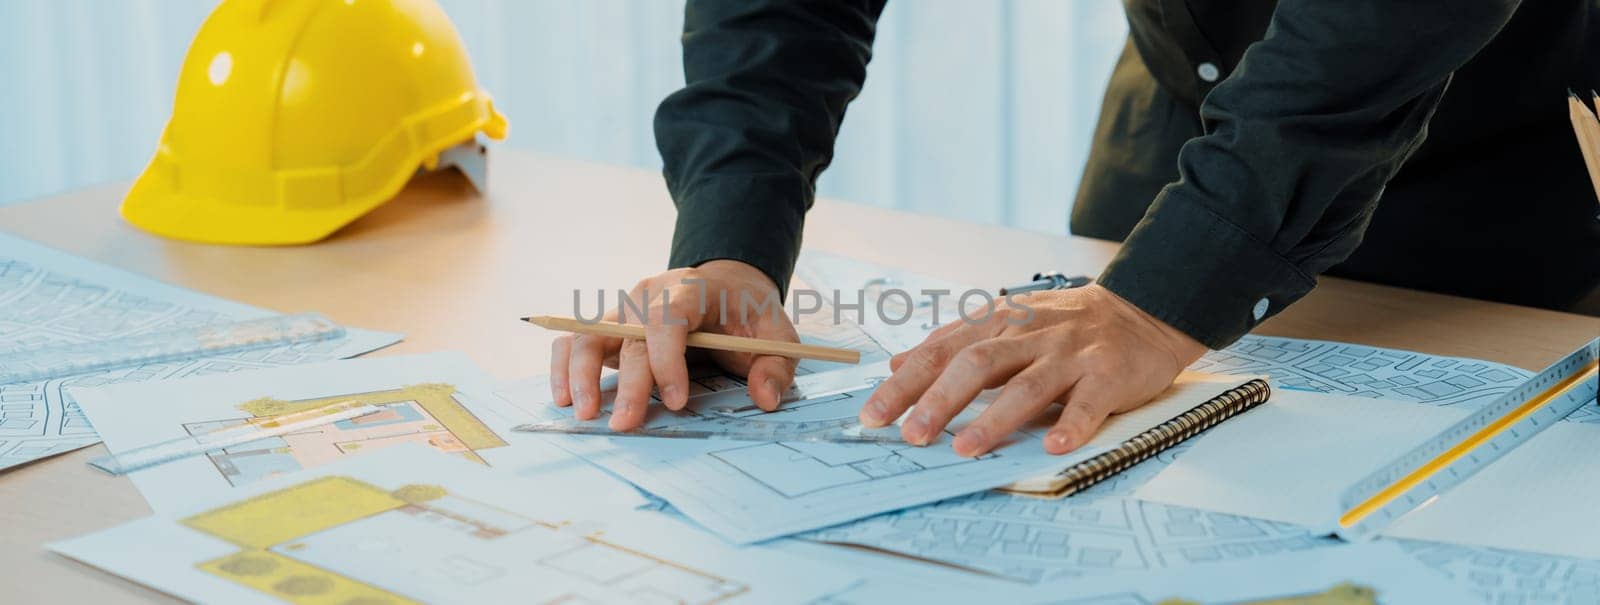 Professional engineer measuring the blueprint. Professional engineer working architectural project at studio on a table with yellow helmet and architectural equipment scatter around. Delineation.